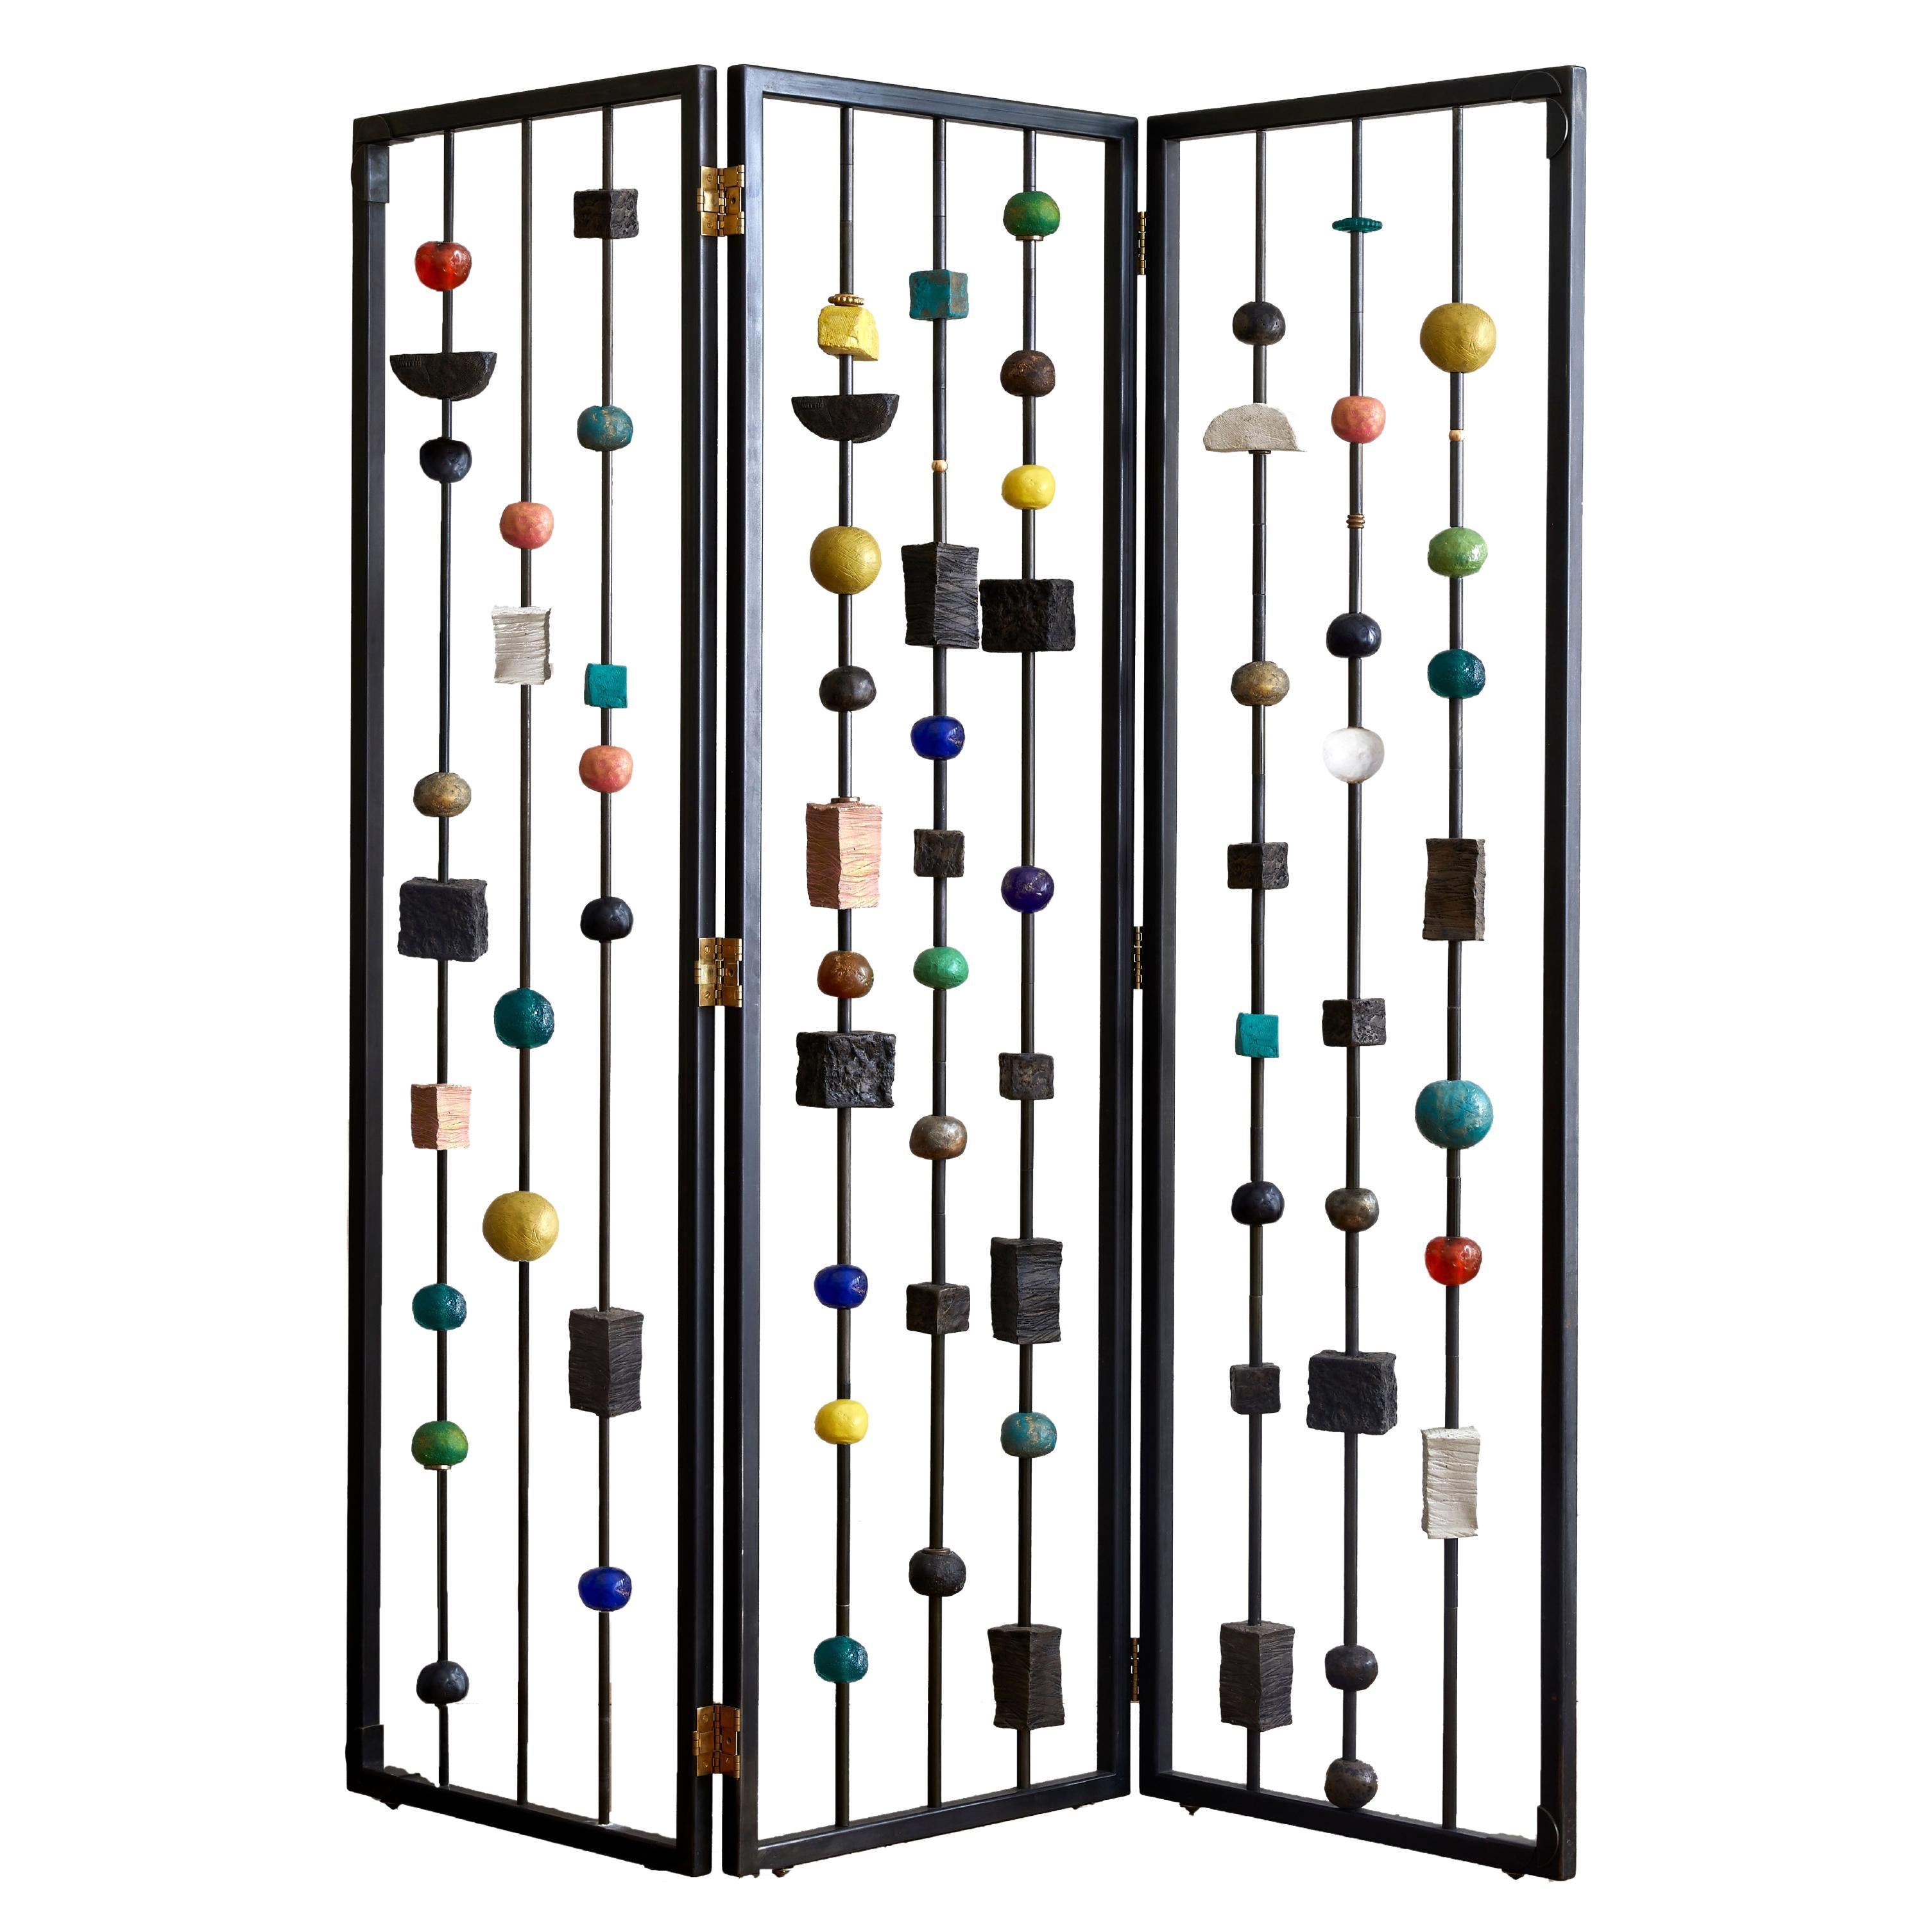 Hand-Crafted Sculptural Room Divider, Colourful, by Margit Wittig